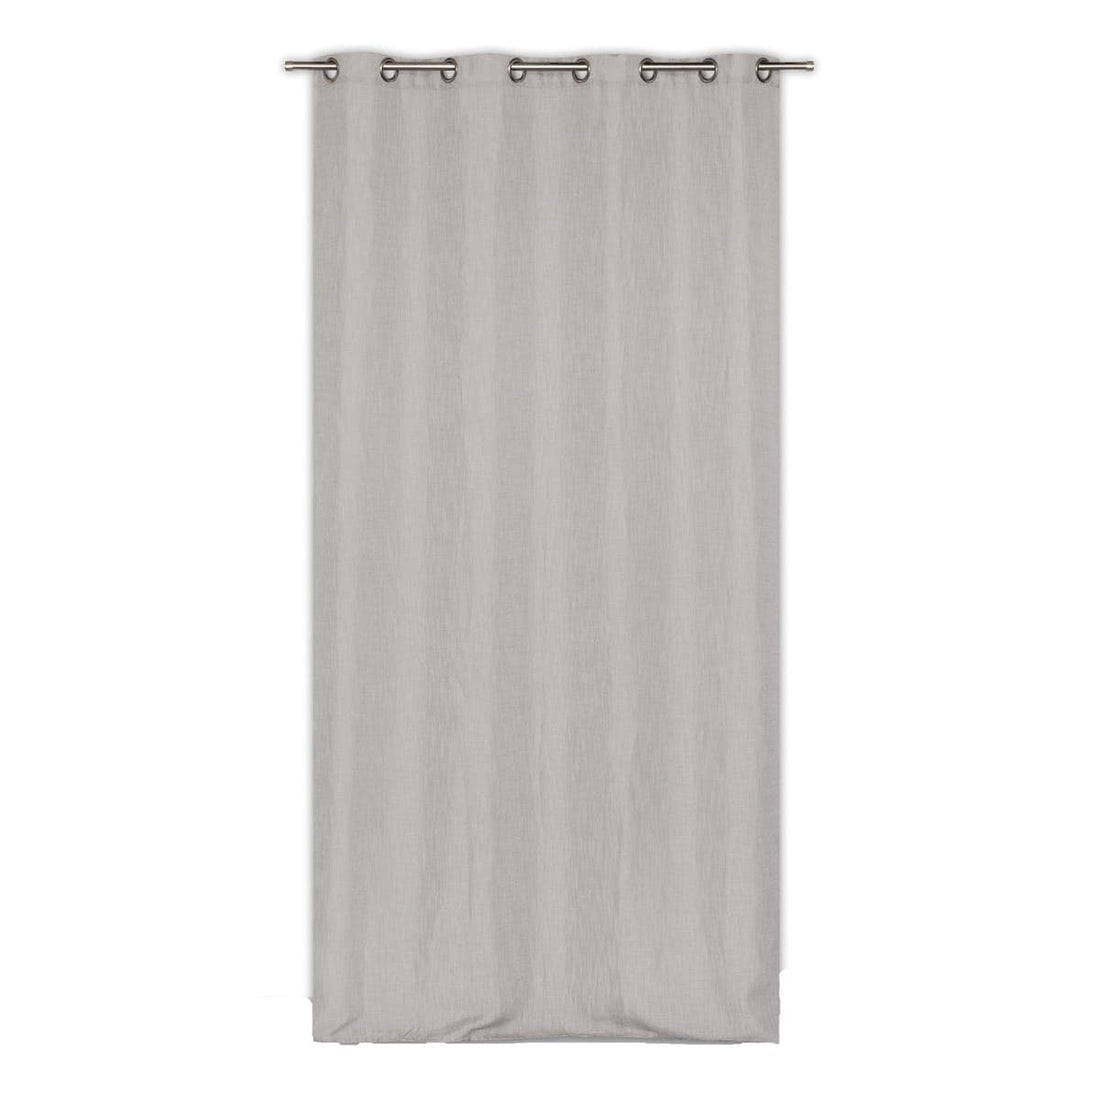 INFINI GREY OPAQUE CURTAIN 140X280 CM WITH EYELETS - best price from Maltashopper.com BR480008005